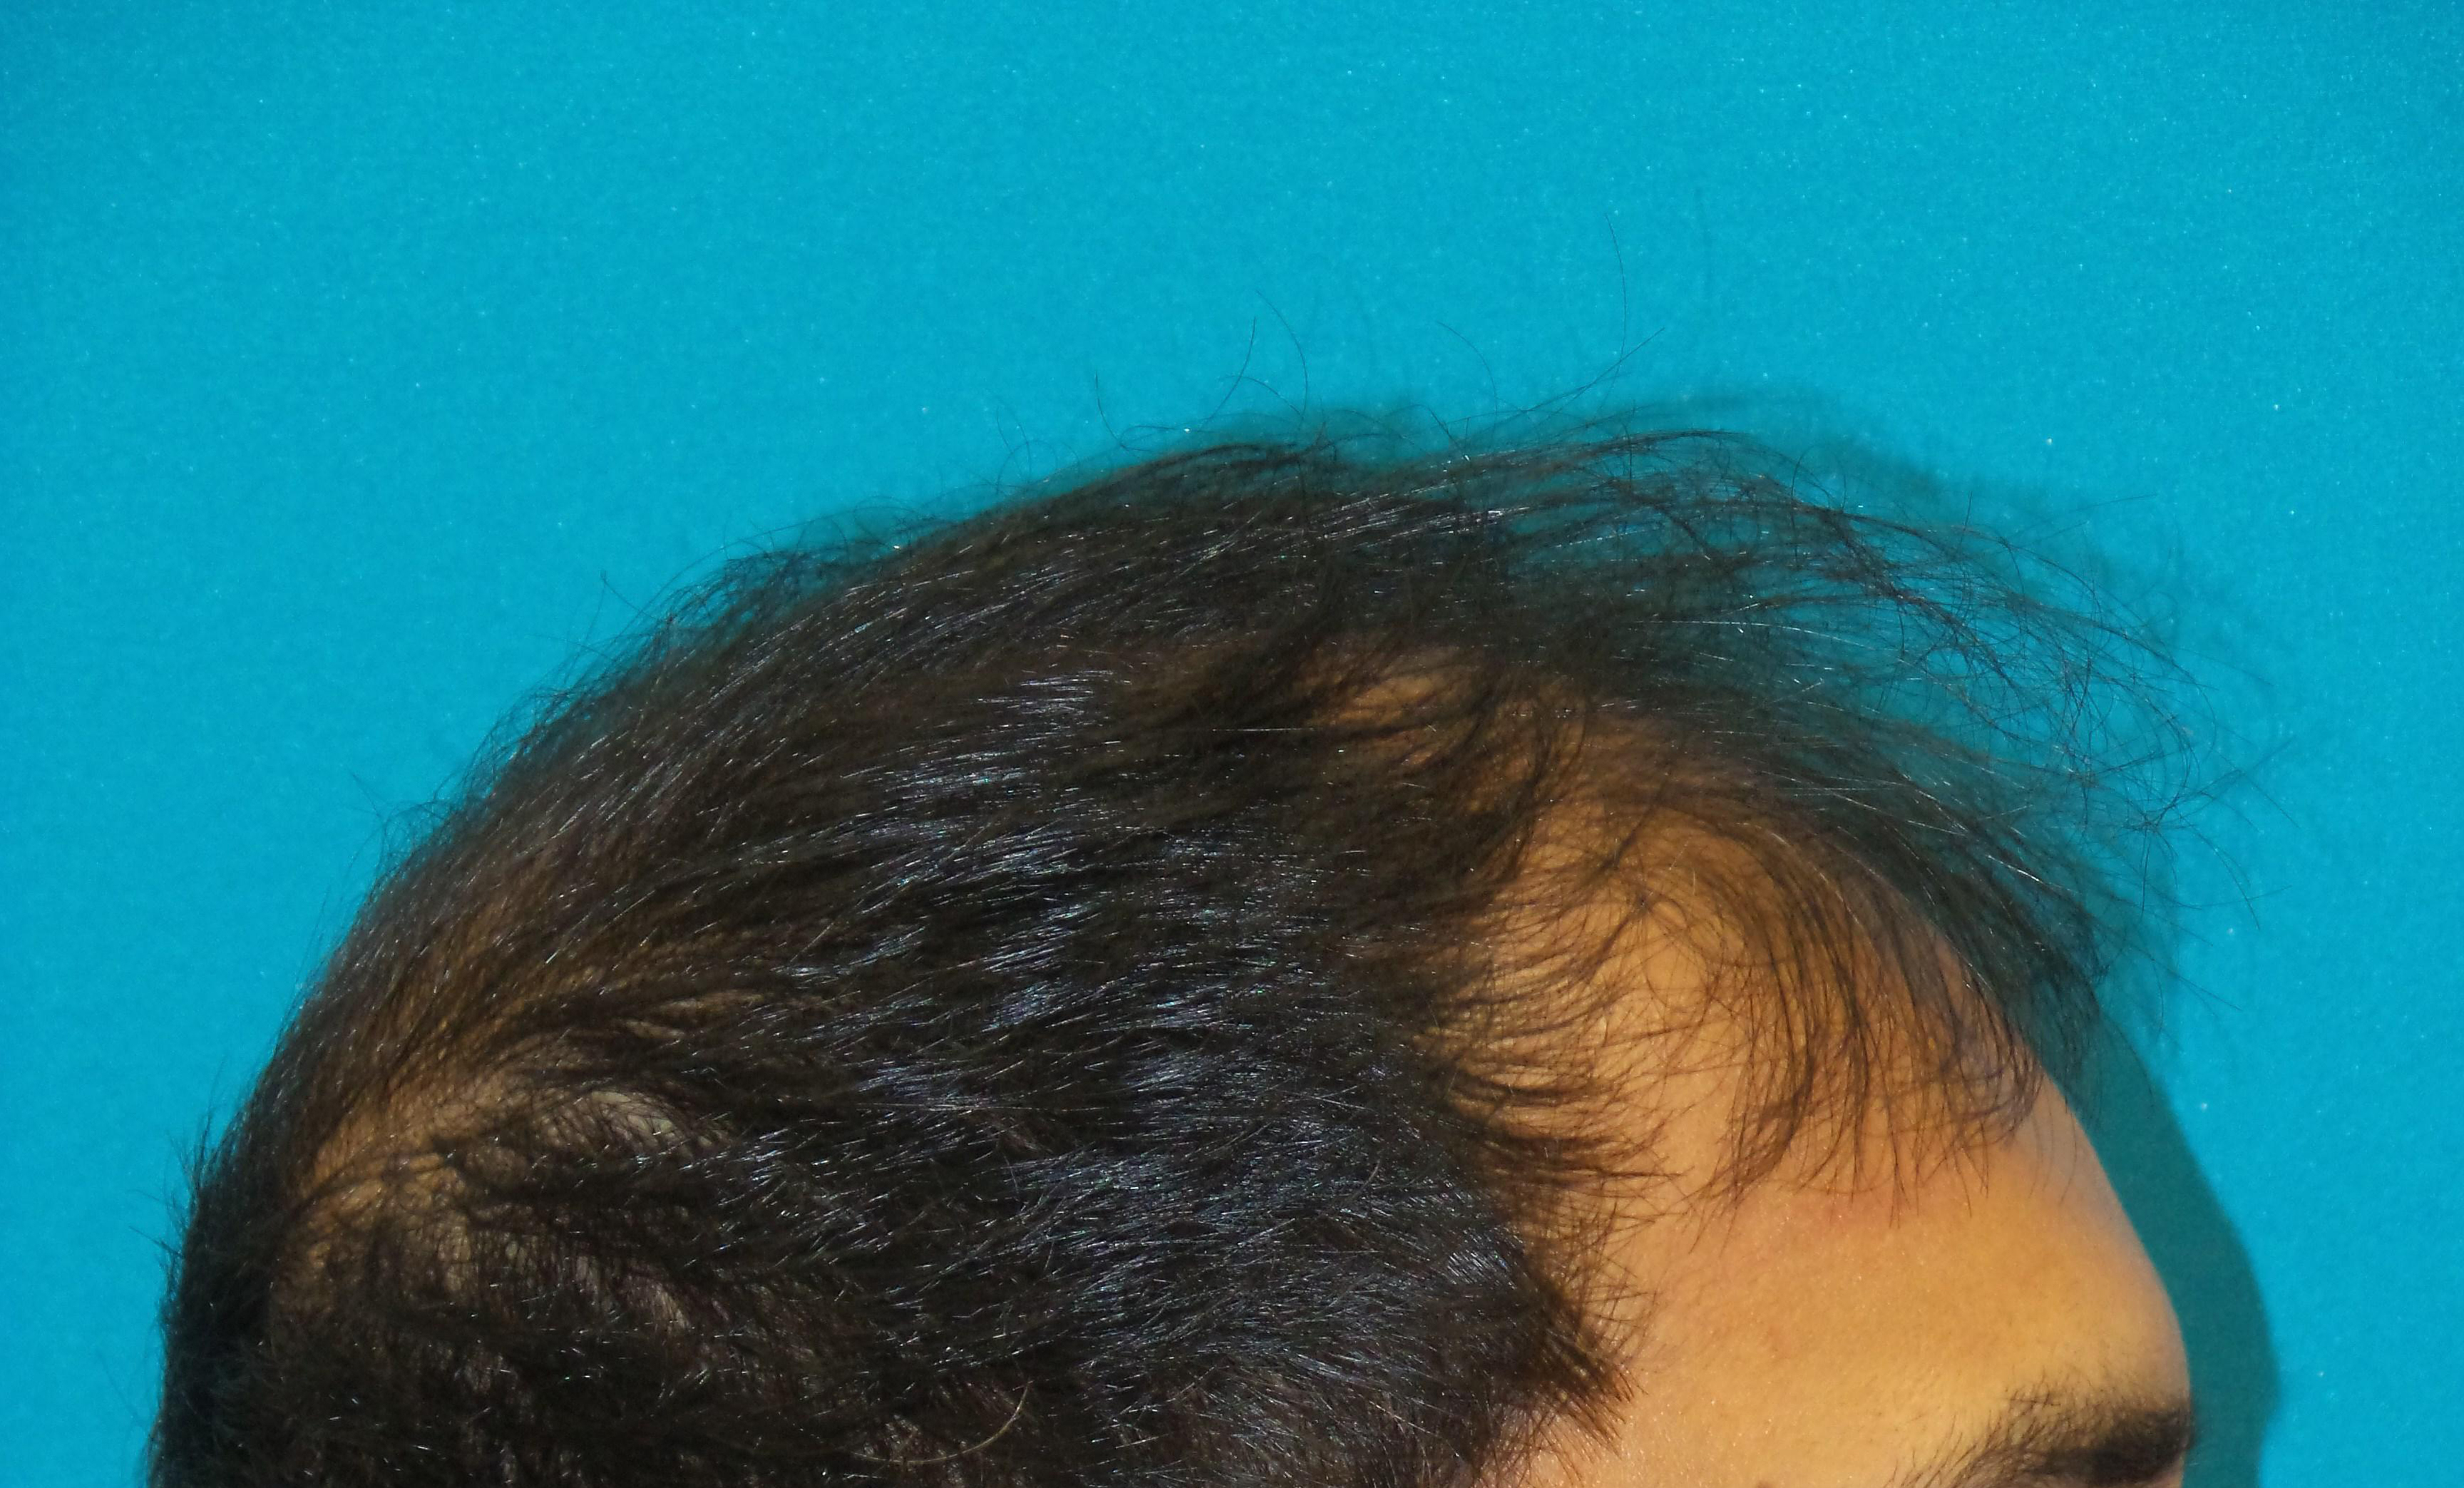 Hair Transplant Before and After | Princeton Plastic Surgeons